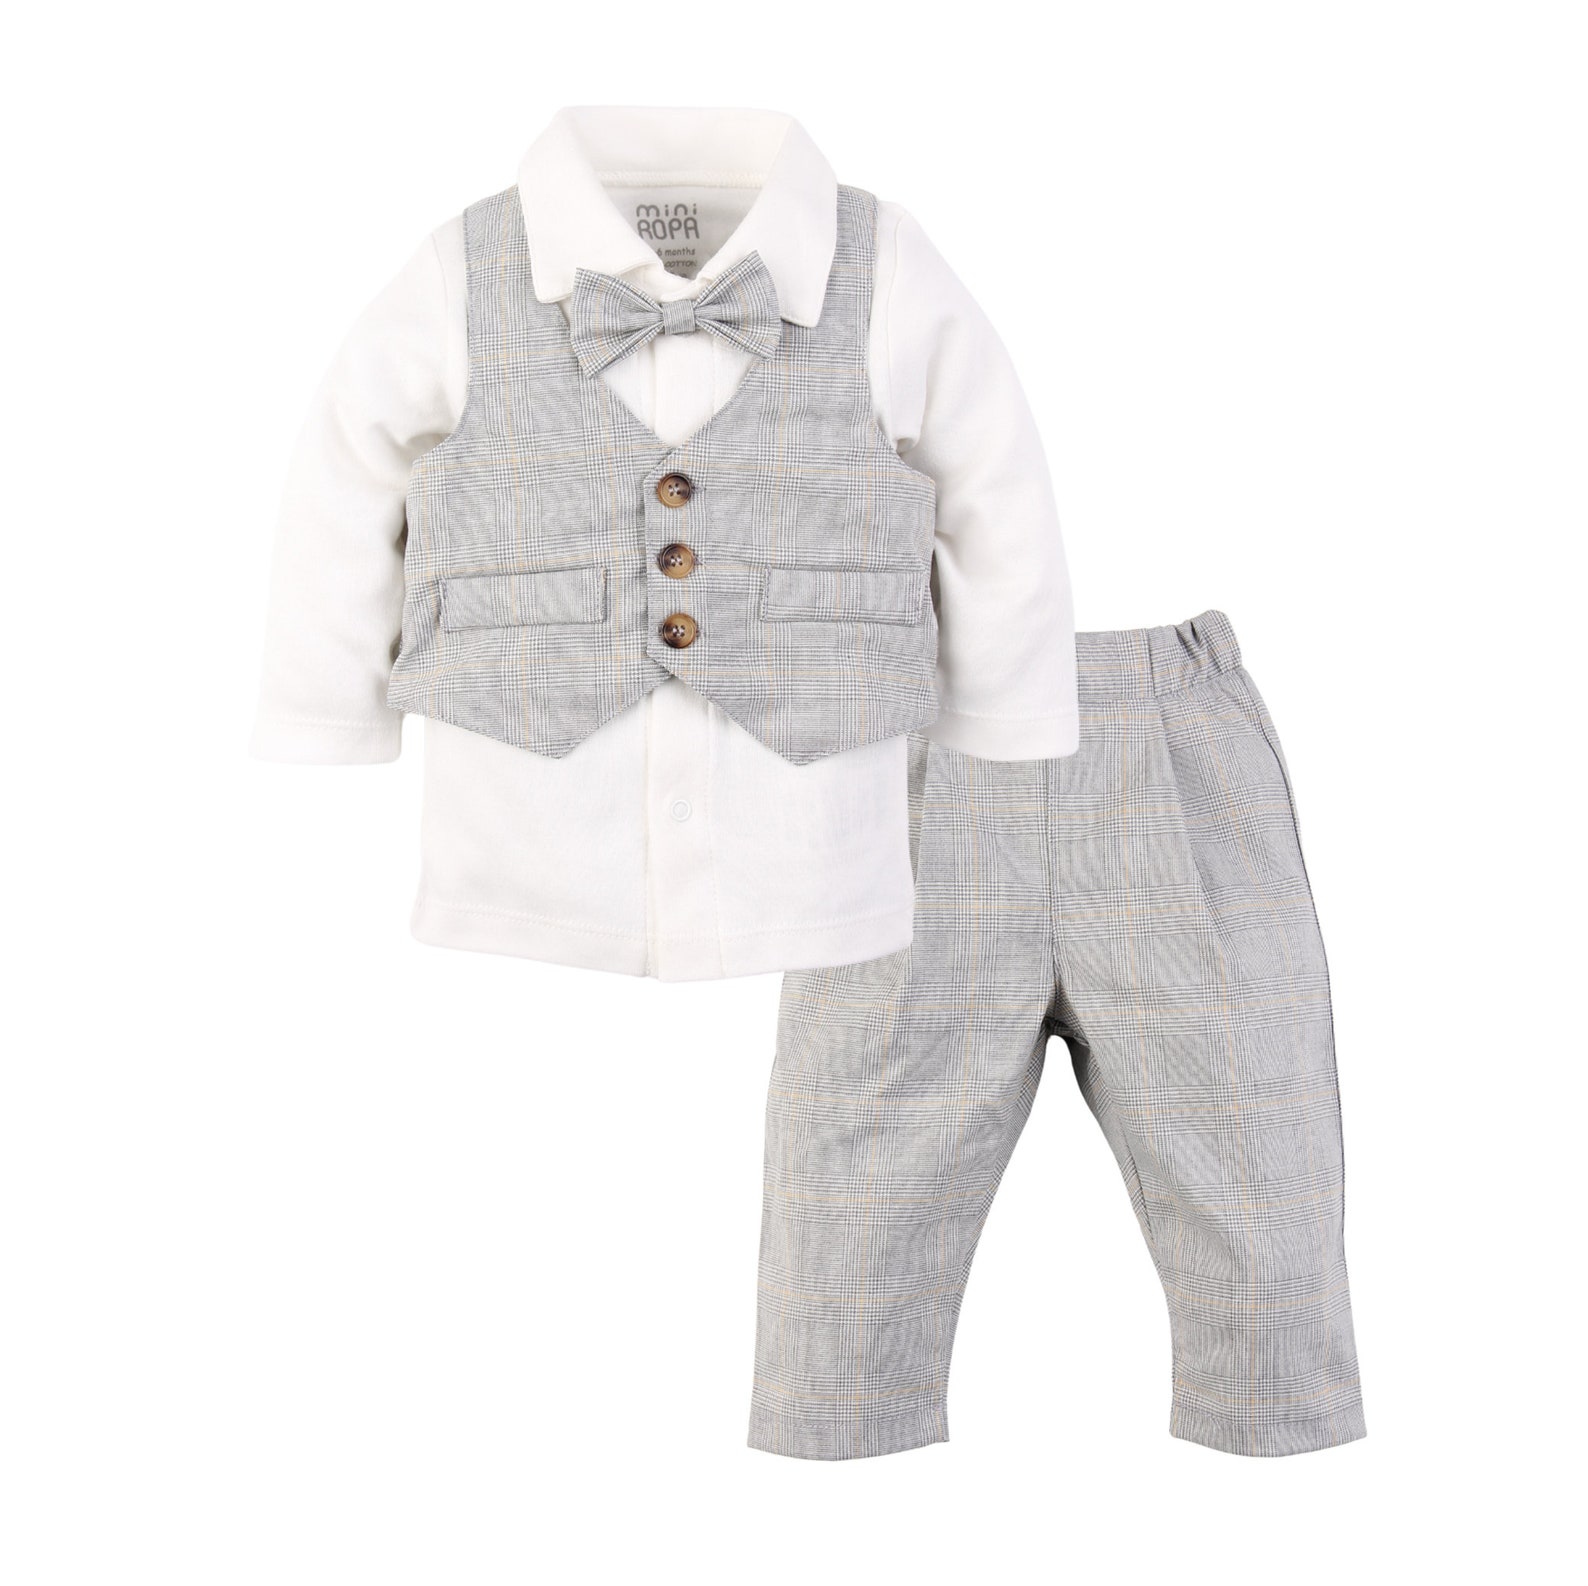 Baby Boys' Suits Ring Bearer Outfit Baby Tuxedo Boy - Etsy